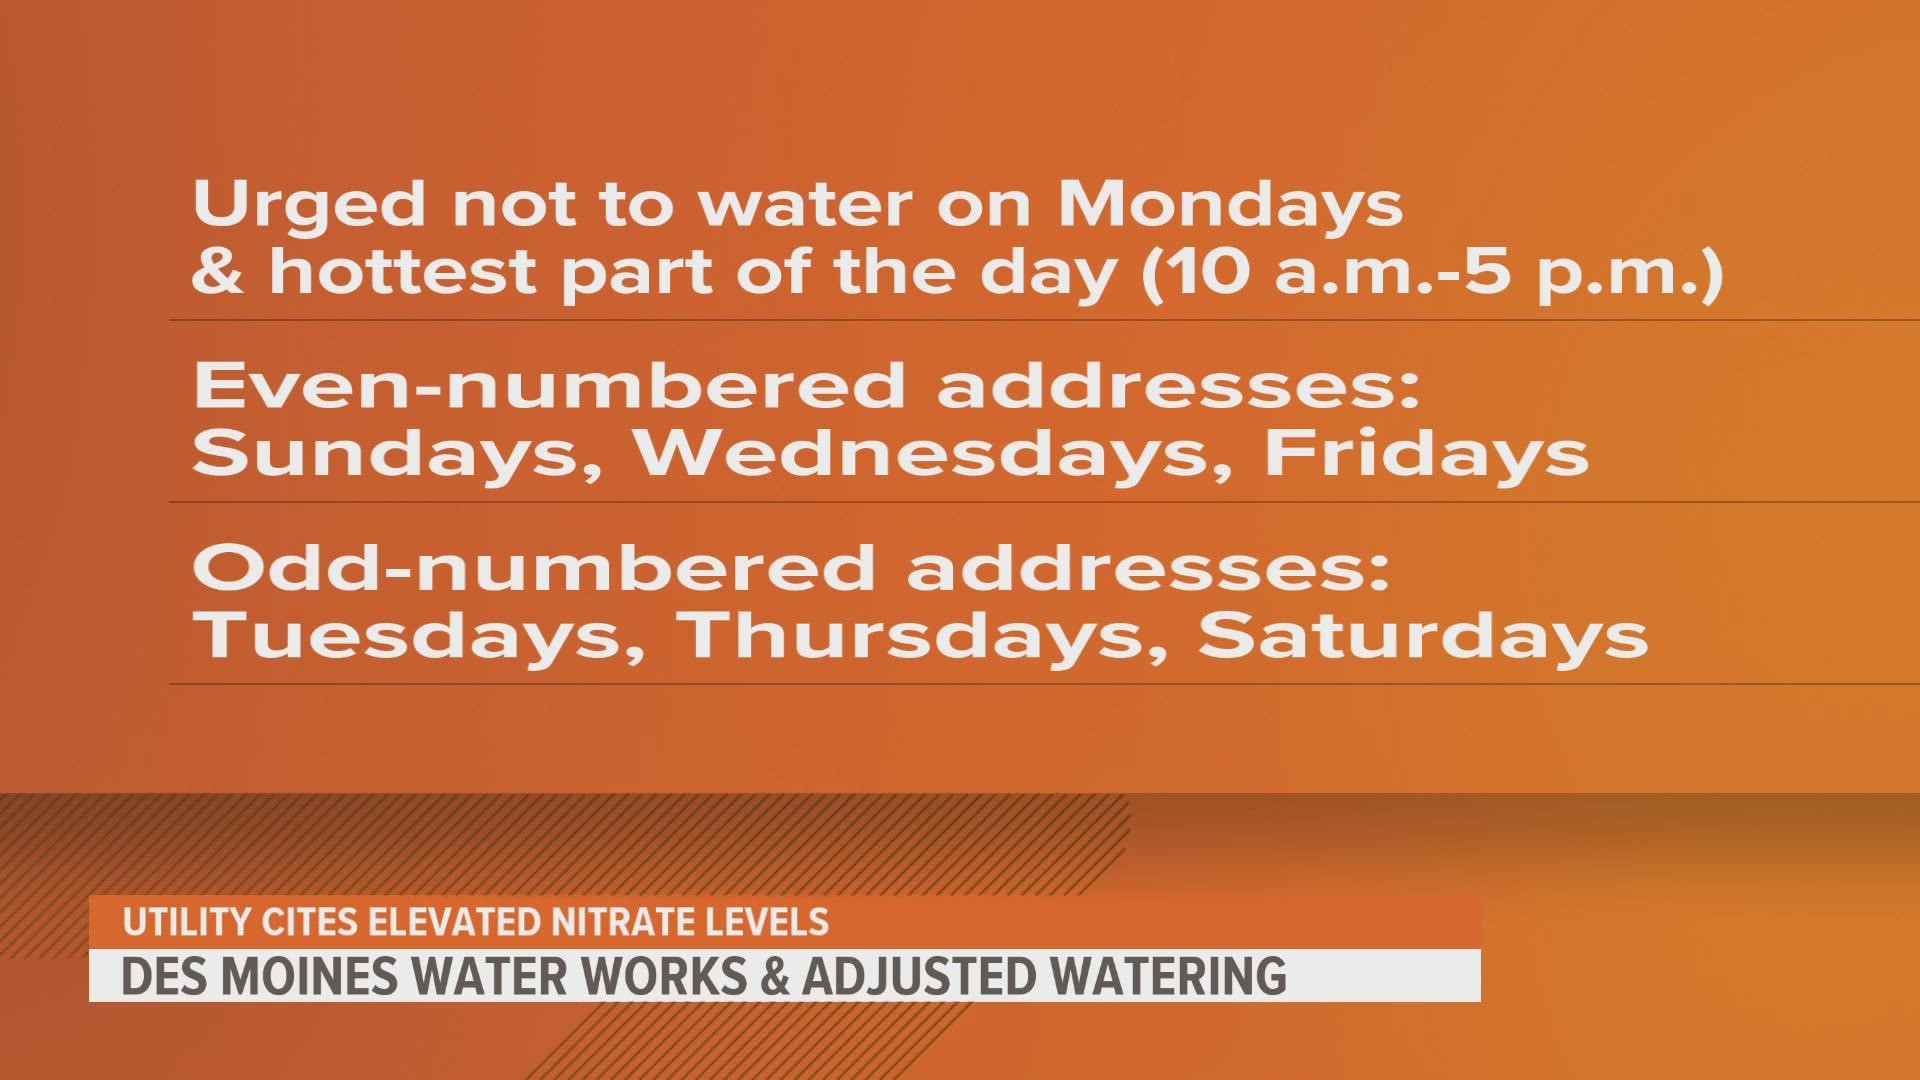 Des Moines Waterworks urged people not to water on Mondays or during the hottest part of the day.